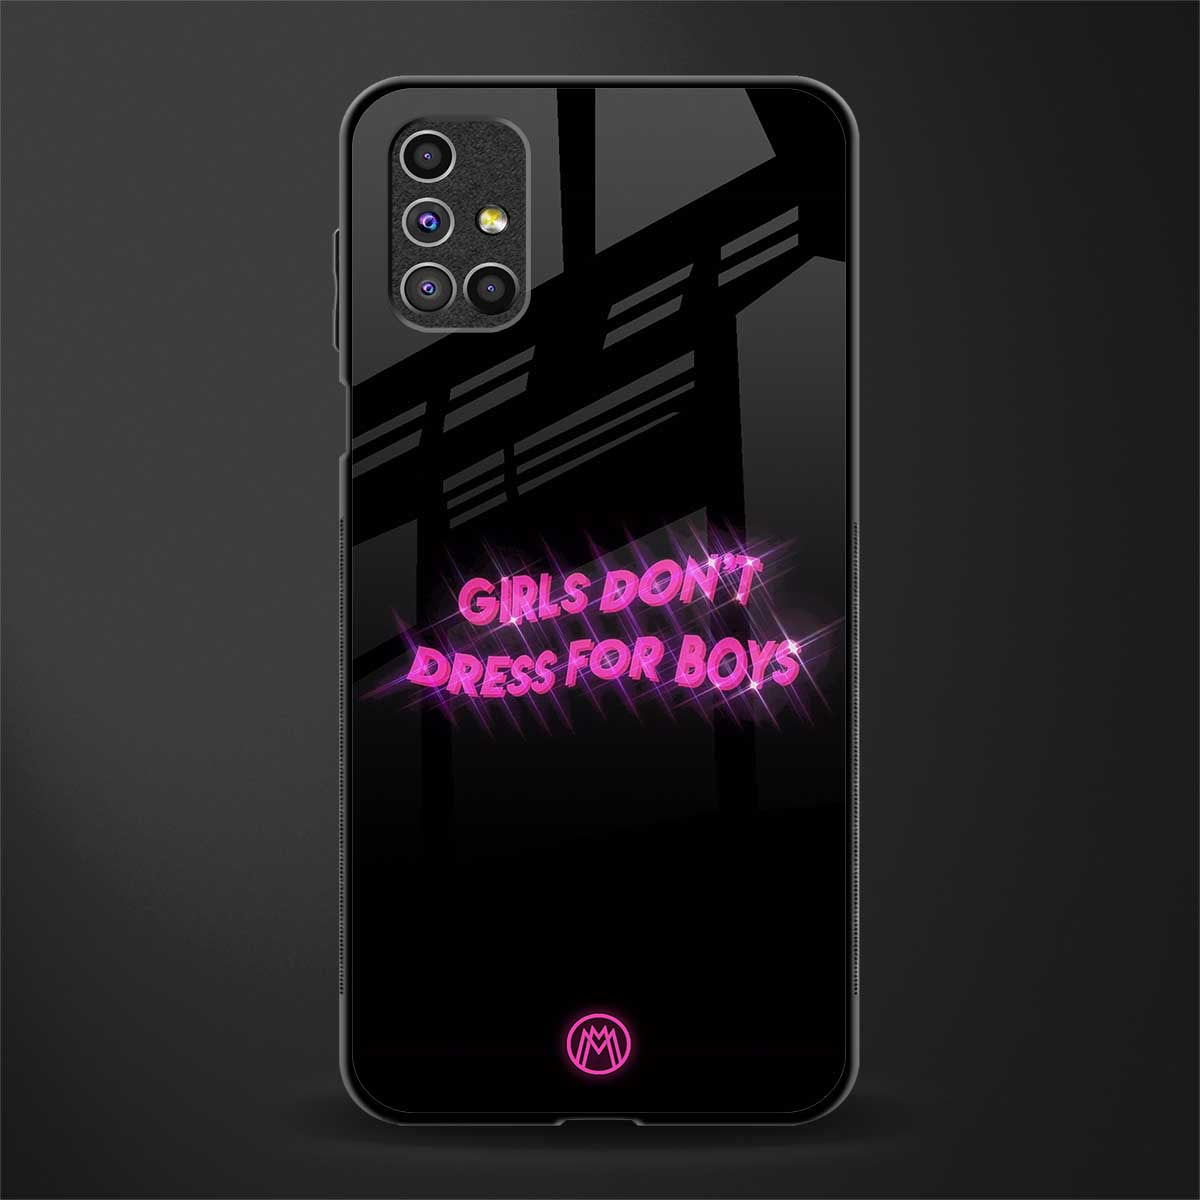 girls don't dress for boys glass case for samsung galaxy m31s image